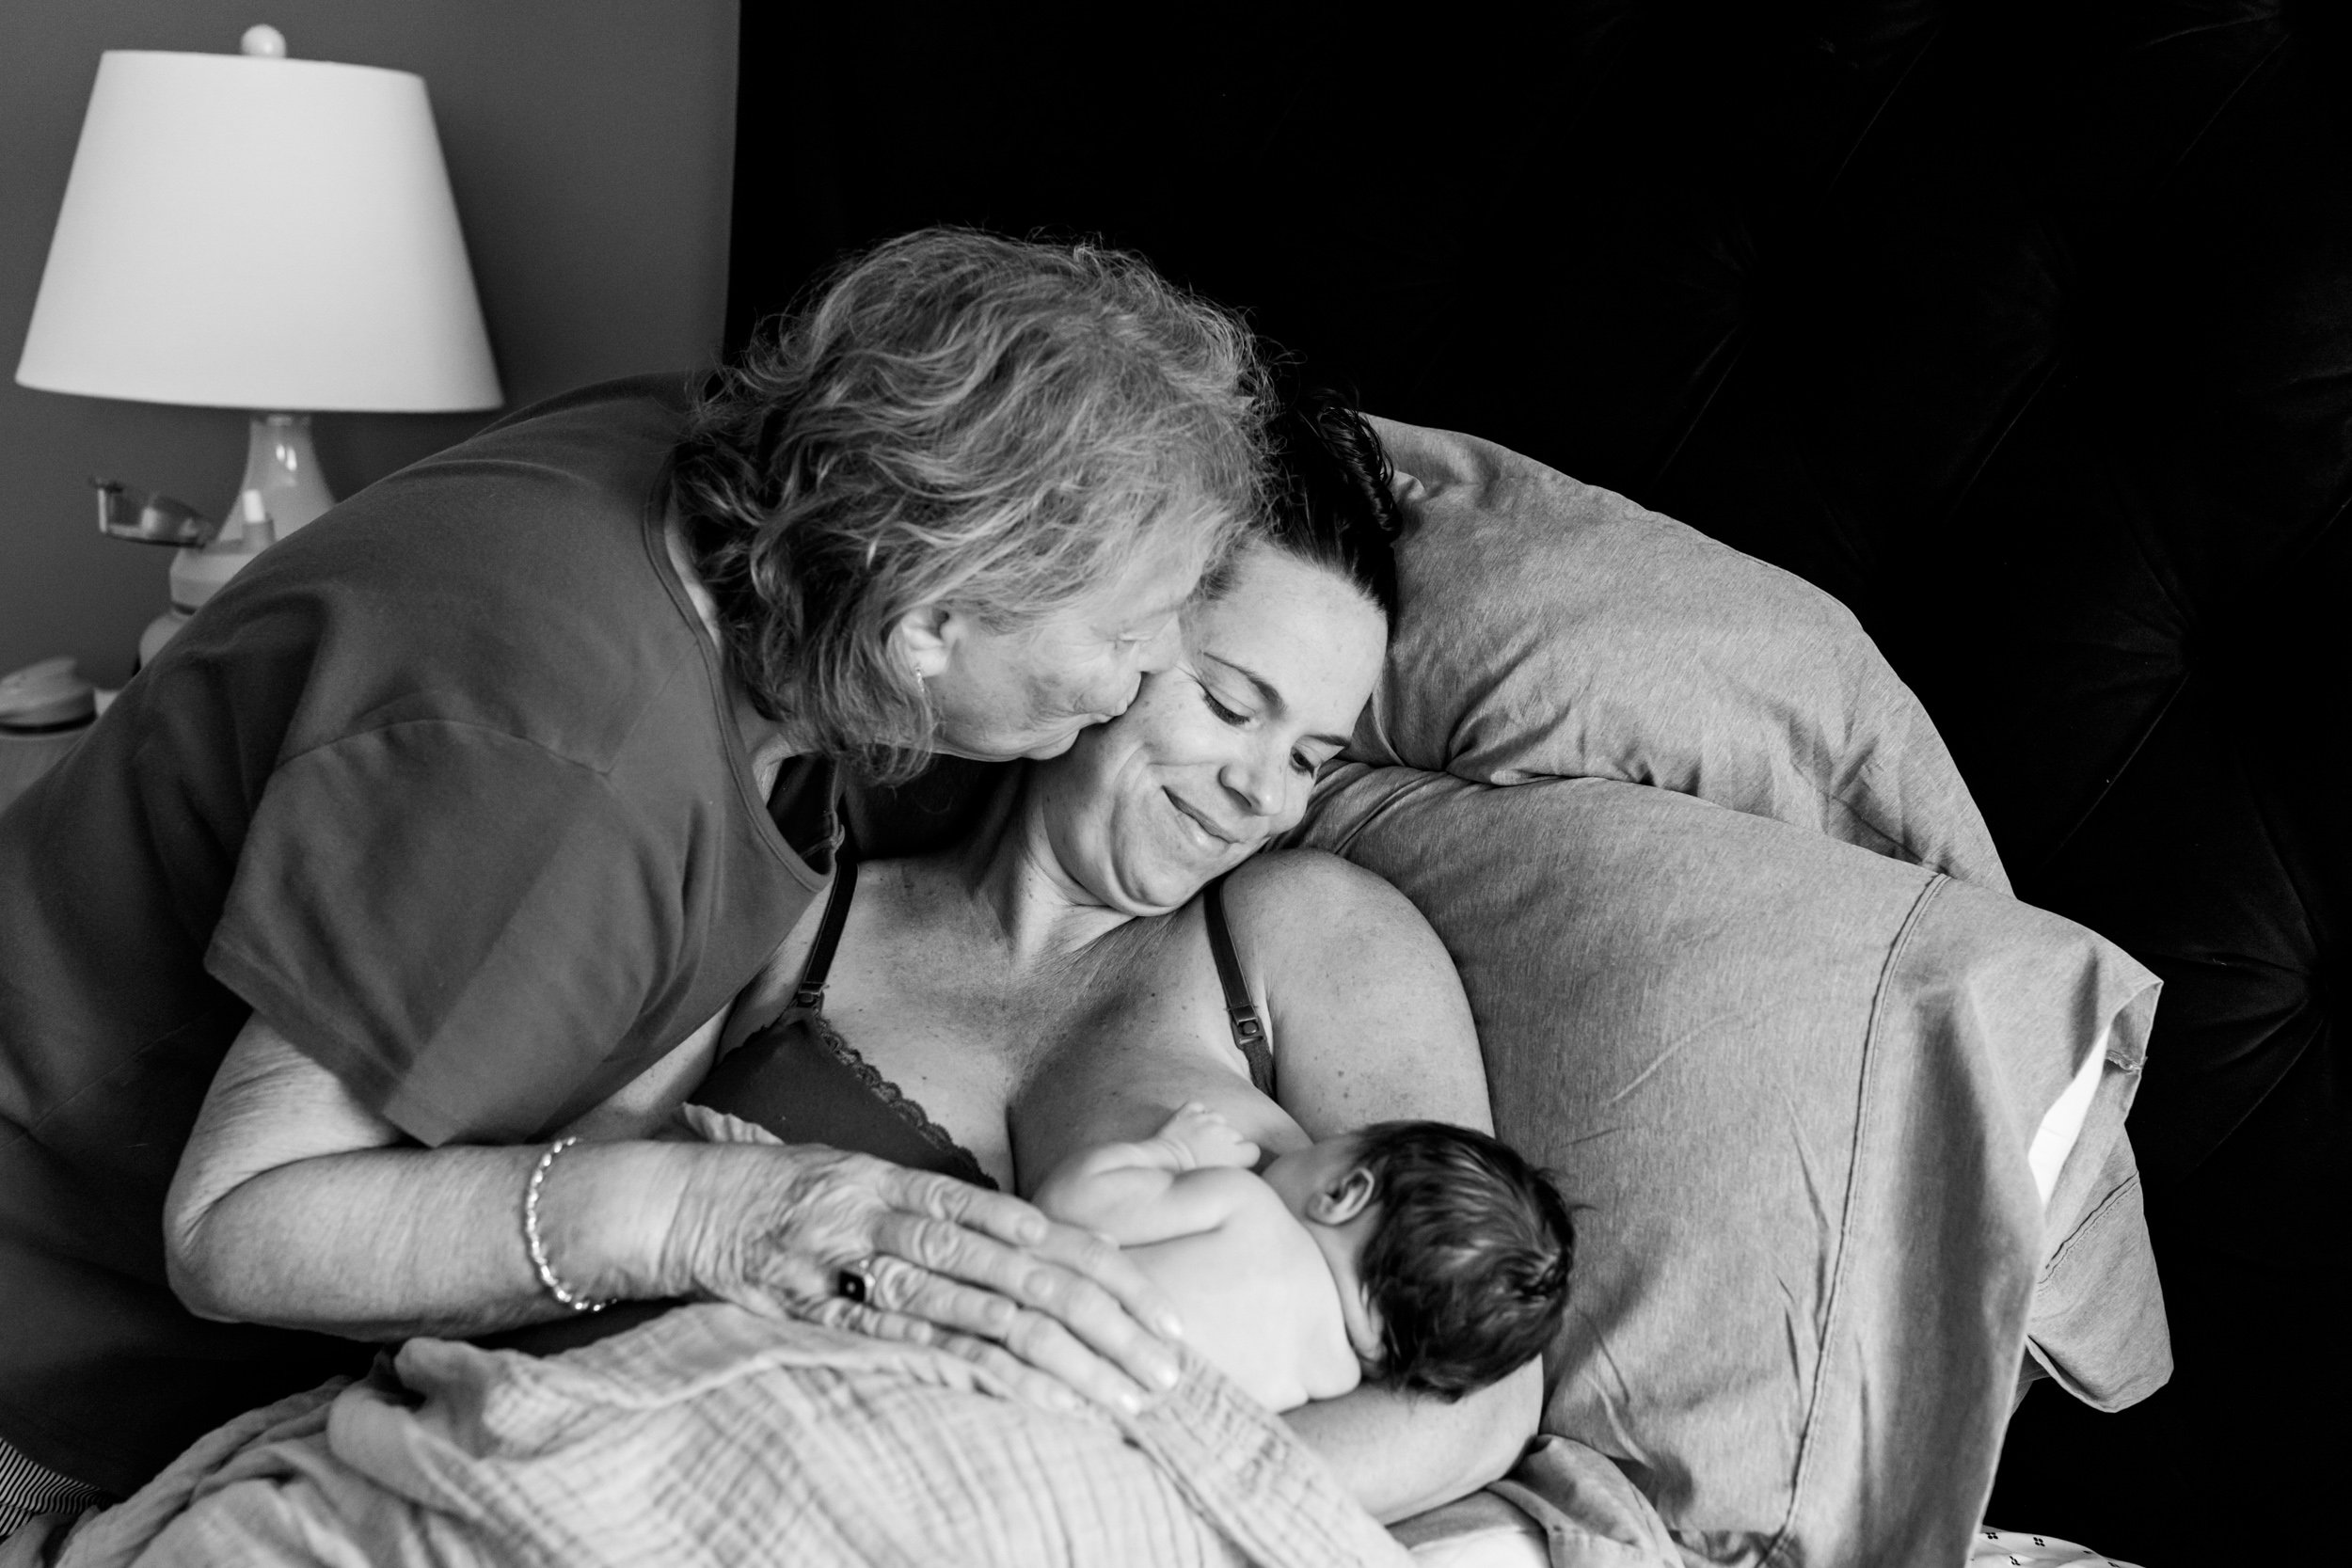 three generations of girls - grandma, mom, and new baby just after birth